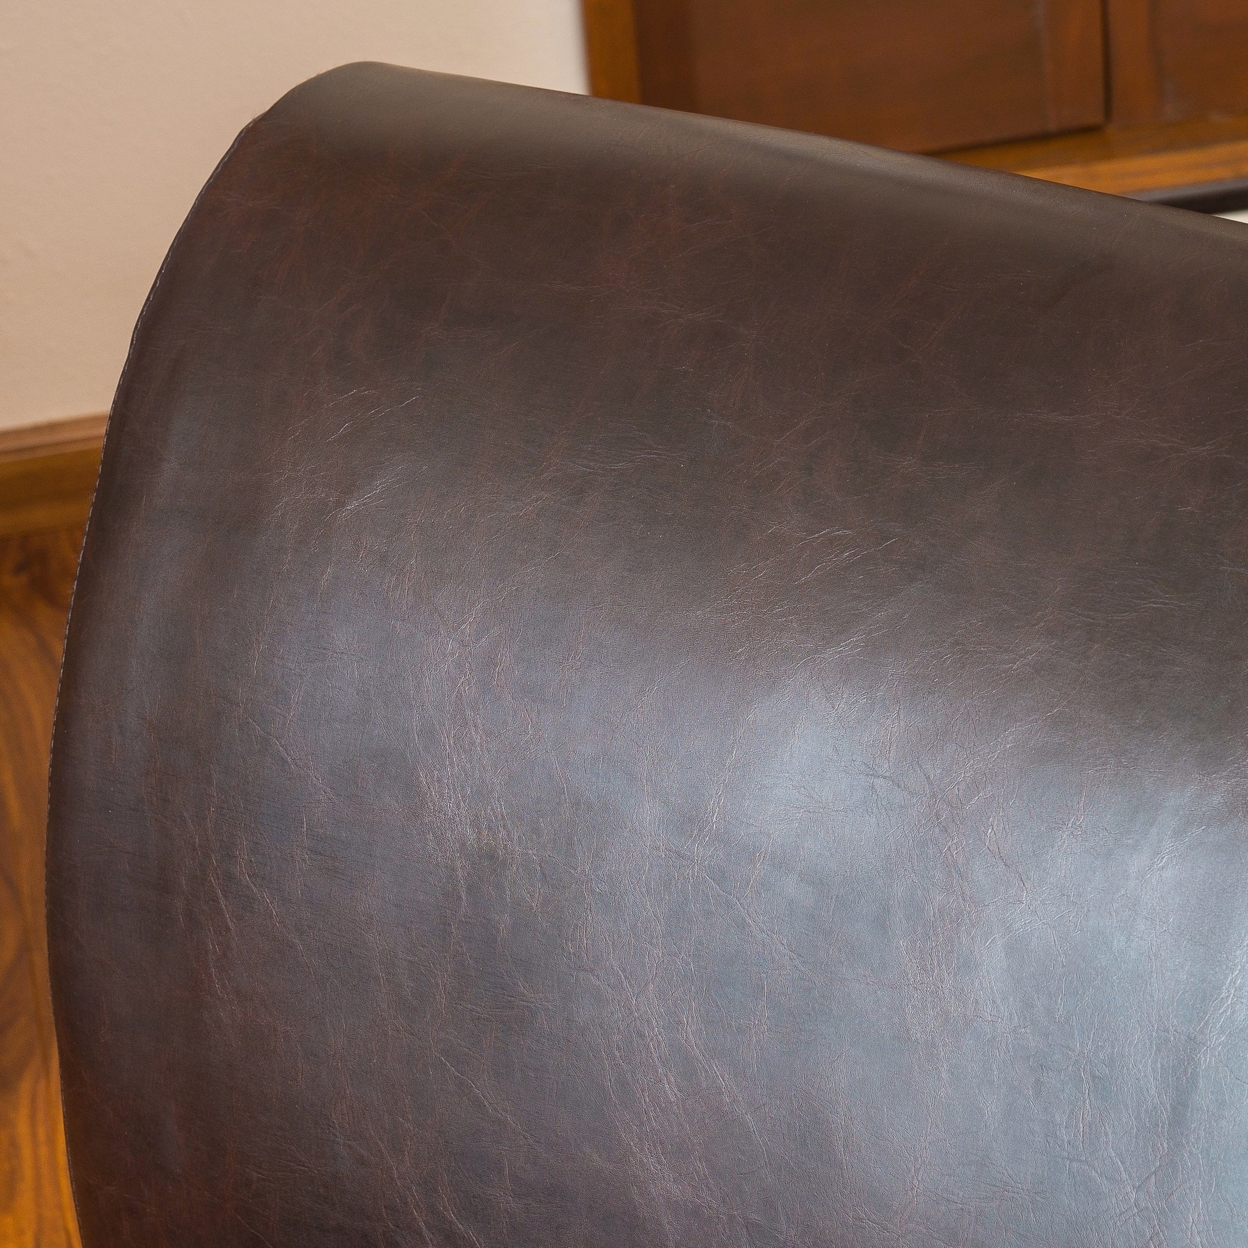 Massimo Brown Leather Loveseat